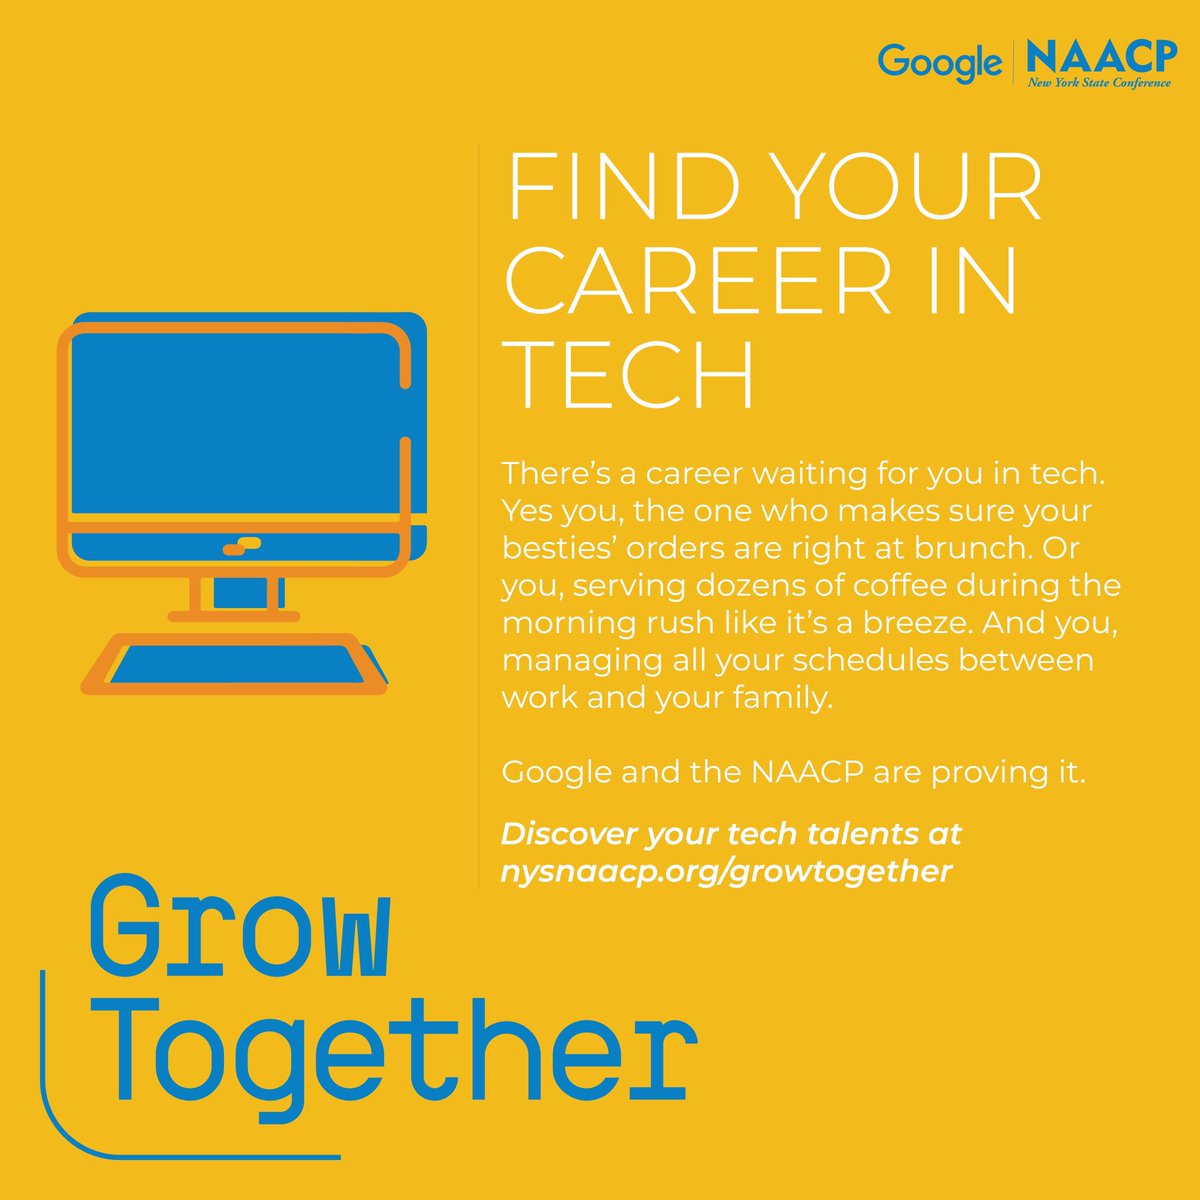 We're thrilled to launch our Grow Together campaign with Google, to create opportunities and awareness in the tech industry. Join us as we work together to break barriers and empower our communities. @google @nysnaacp nysnaacp.org/growtogether #GrowTogether #NAACPNY